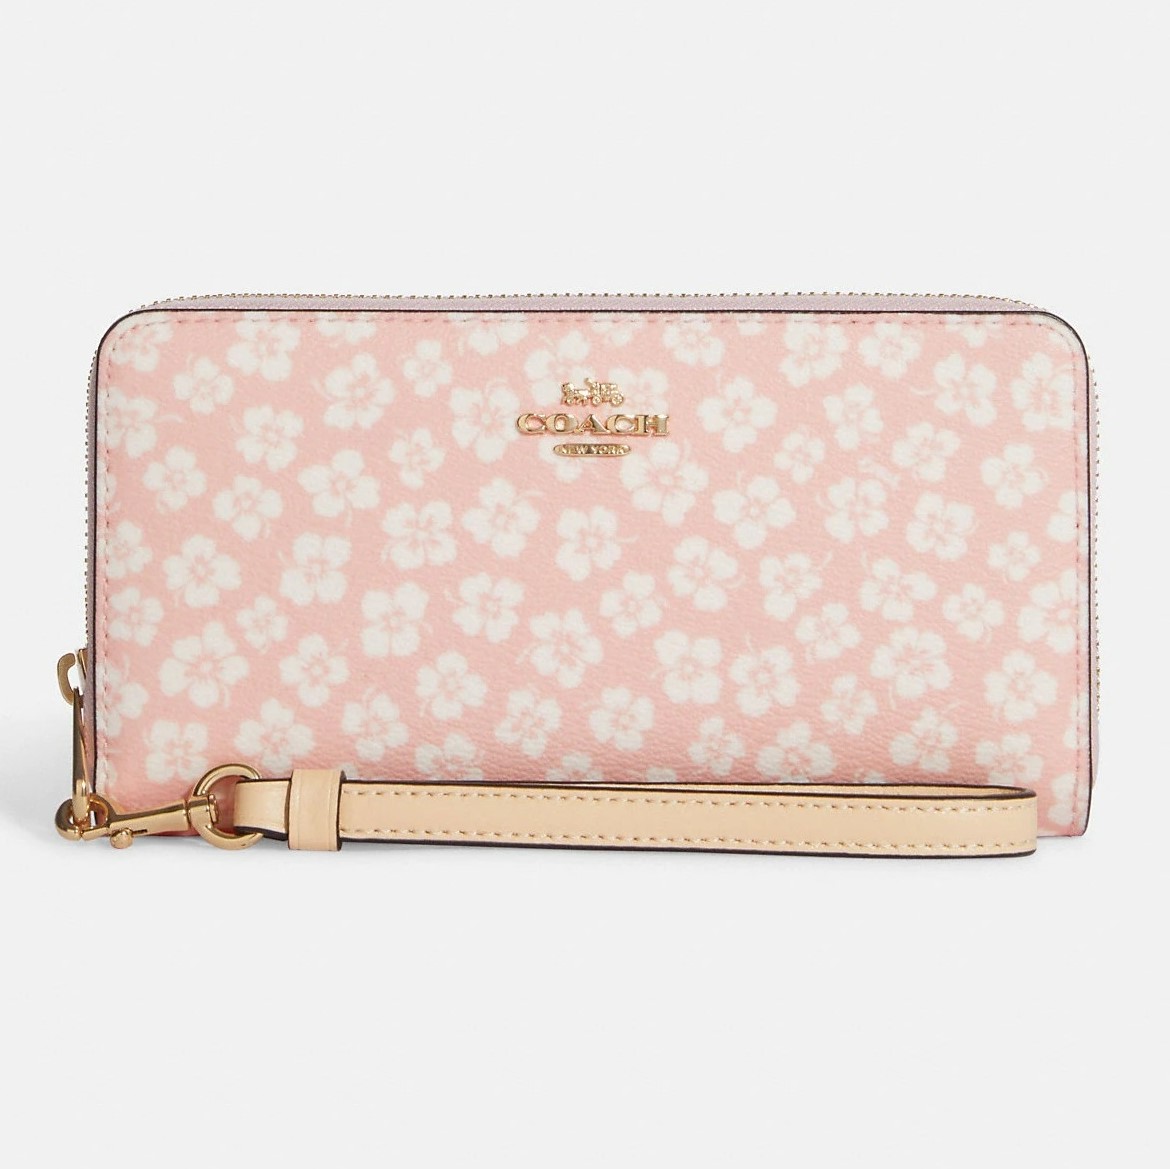 VÍ DÀI NỮ HỒNG PHẤN COACH LONG ZIP AROUND WALLET WITH GRAPHIC DITSY FLORAL PRINT 2